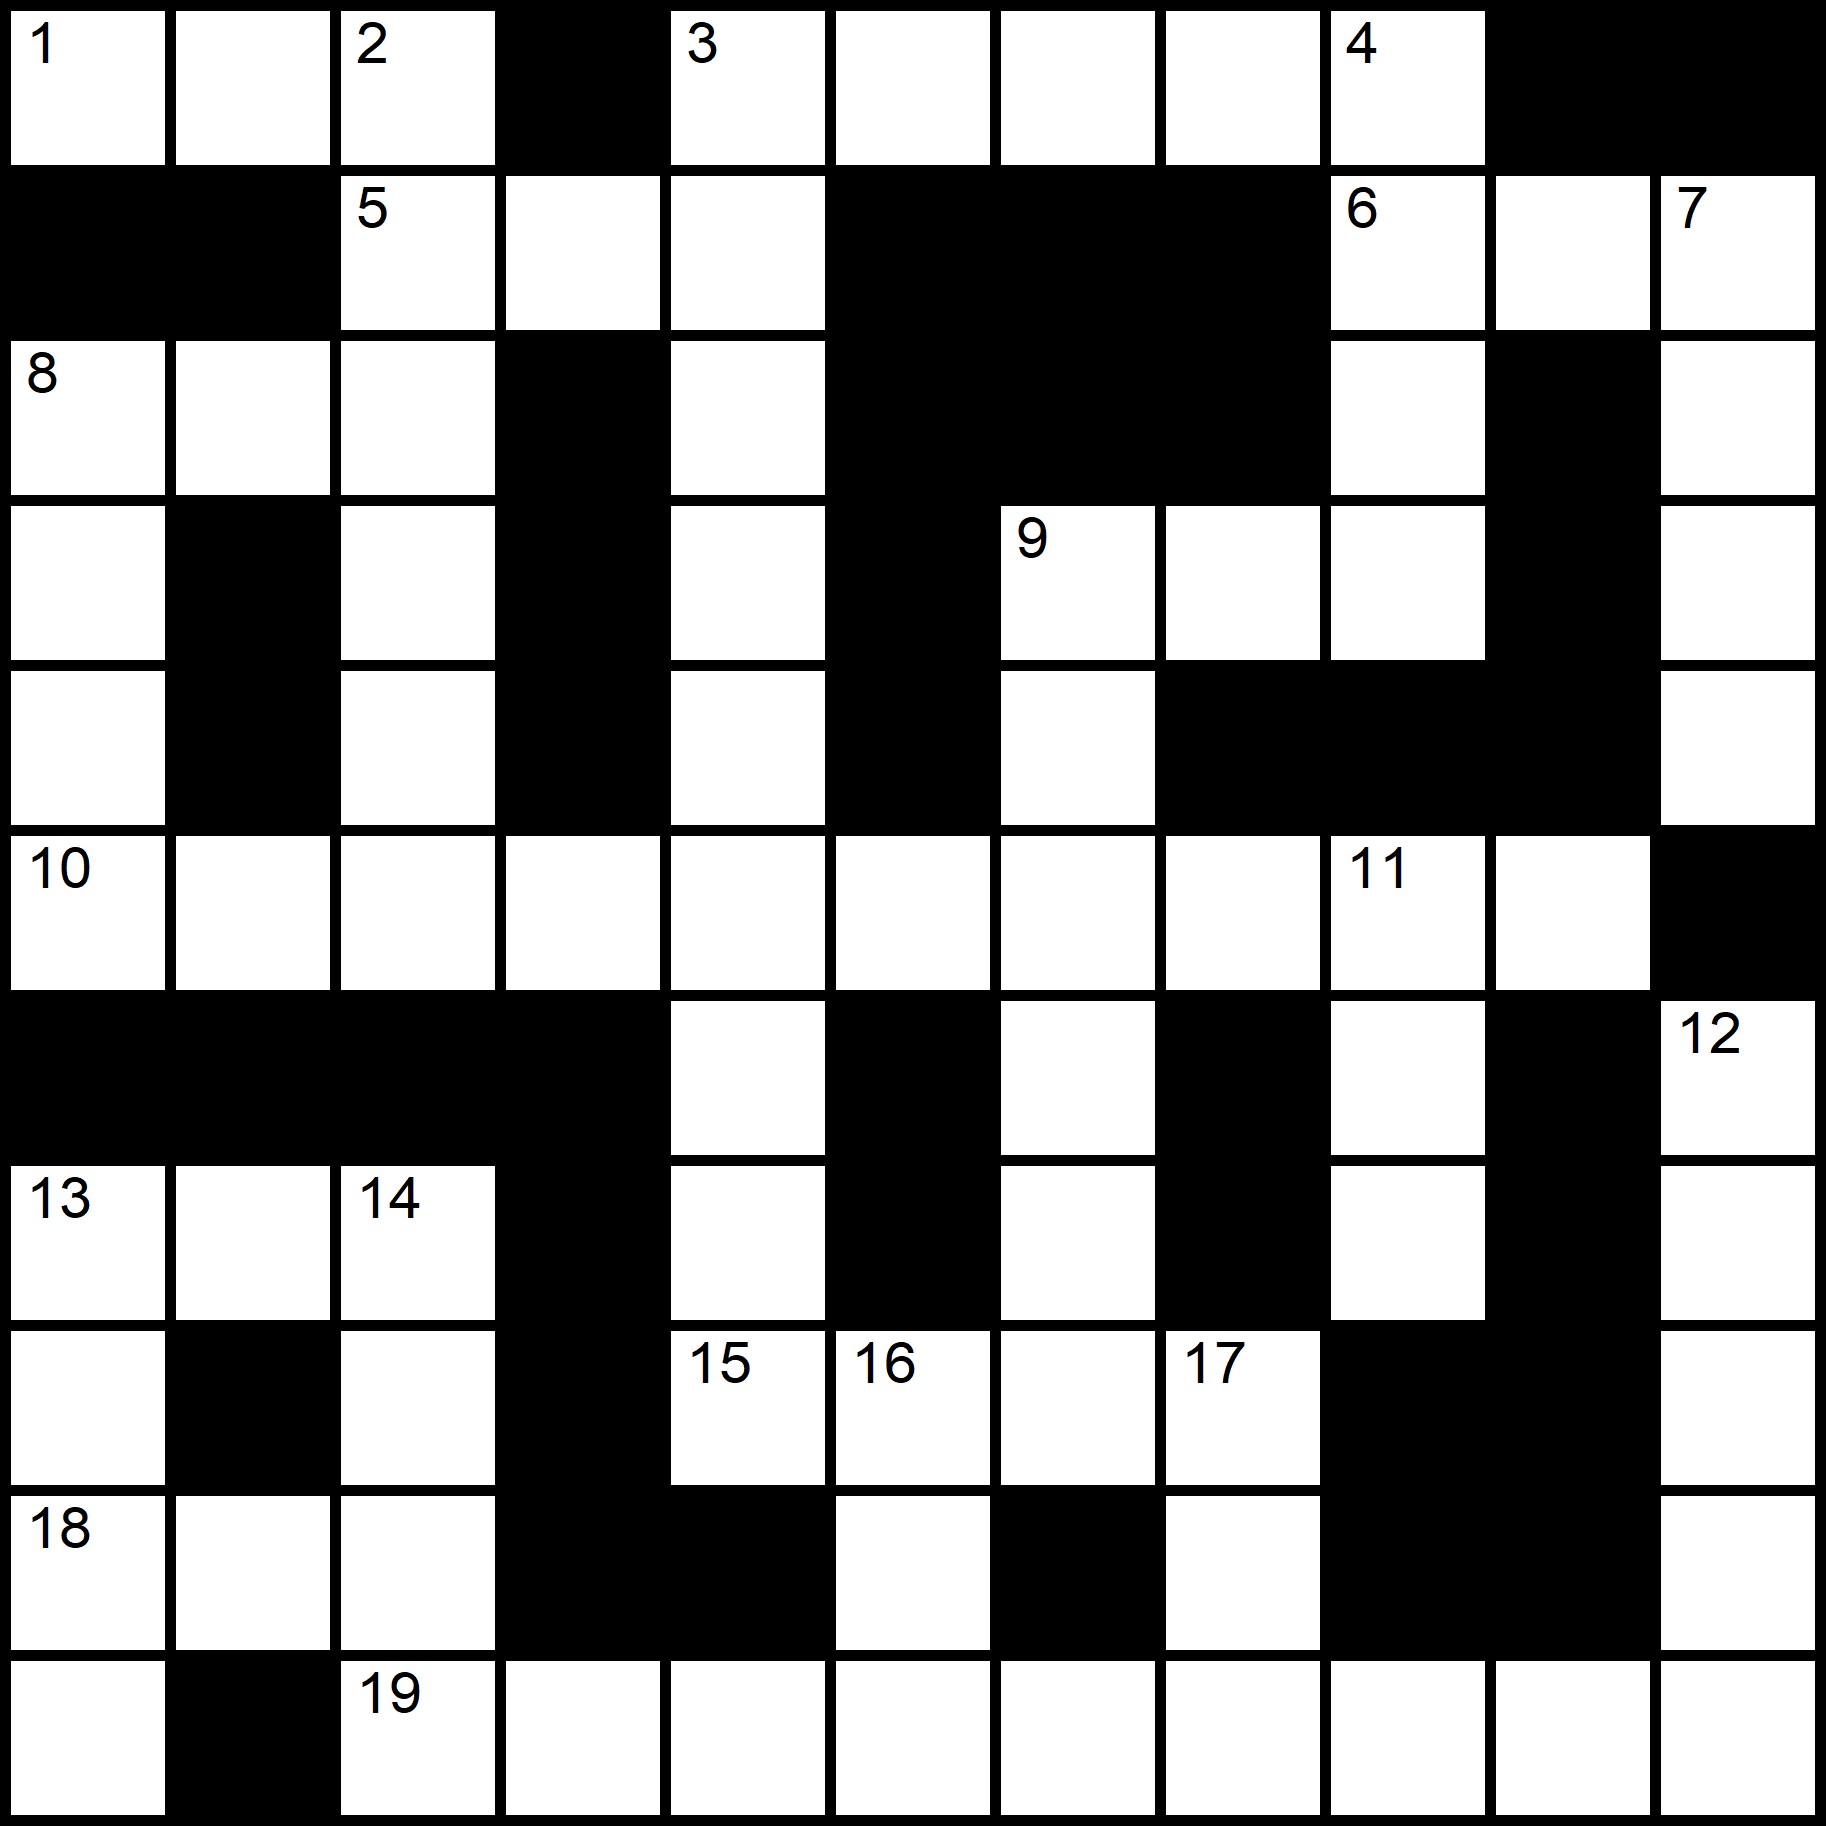 Super Easy Crosswords Printable With Answers -
Placidus Flora - Crossword number Thirty